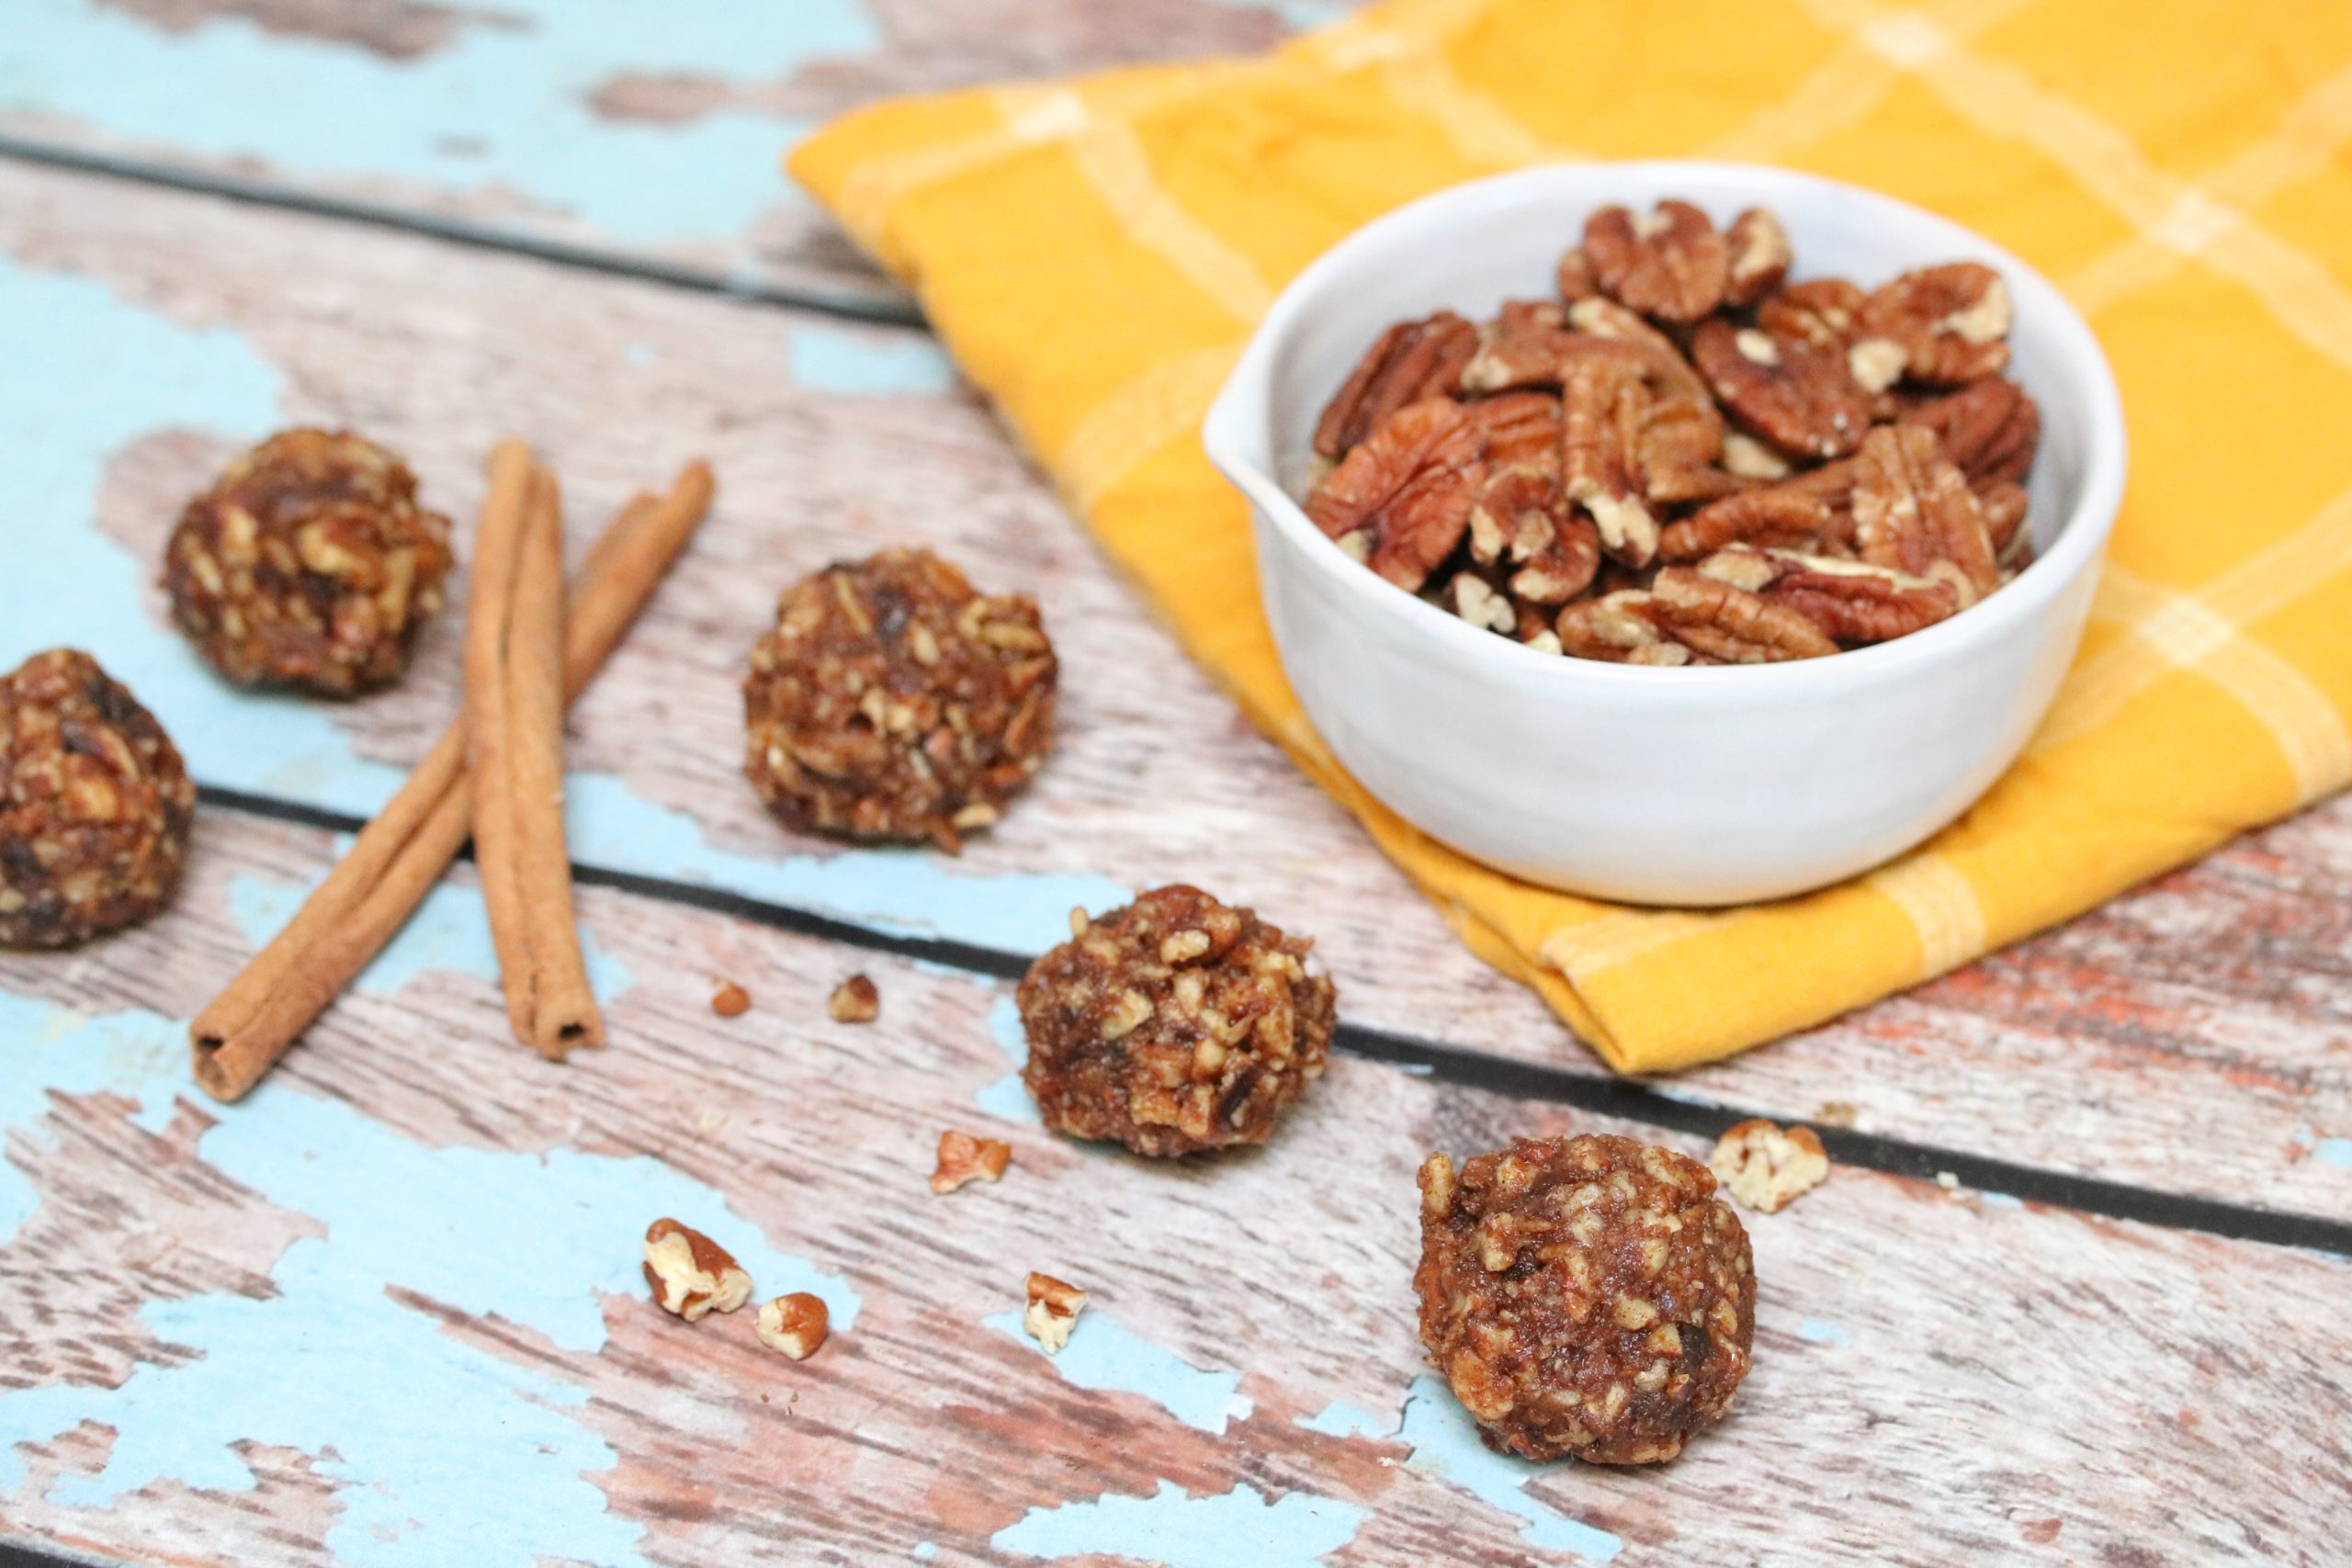 Three no-bake pecan balls in front of a bowl with pecans on a yellow cloth and cinnamon sticks behind it